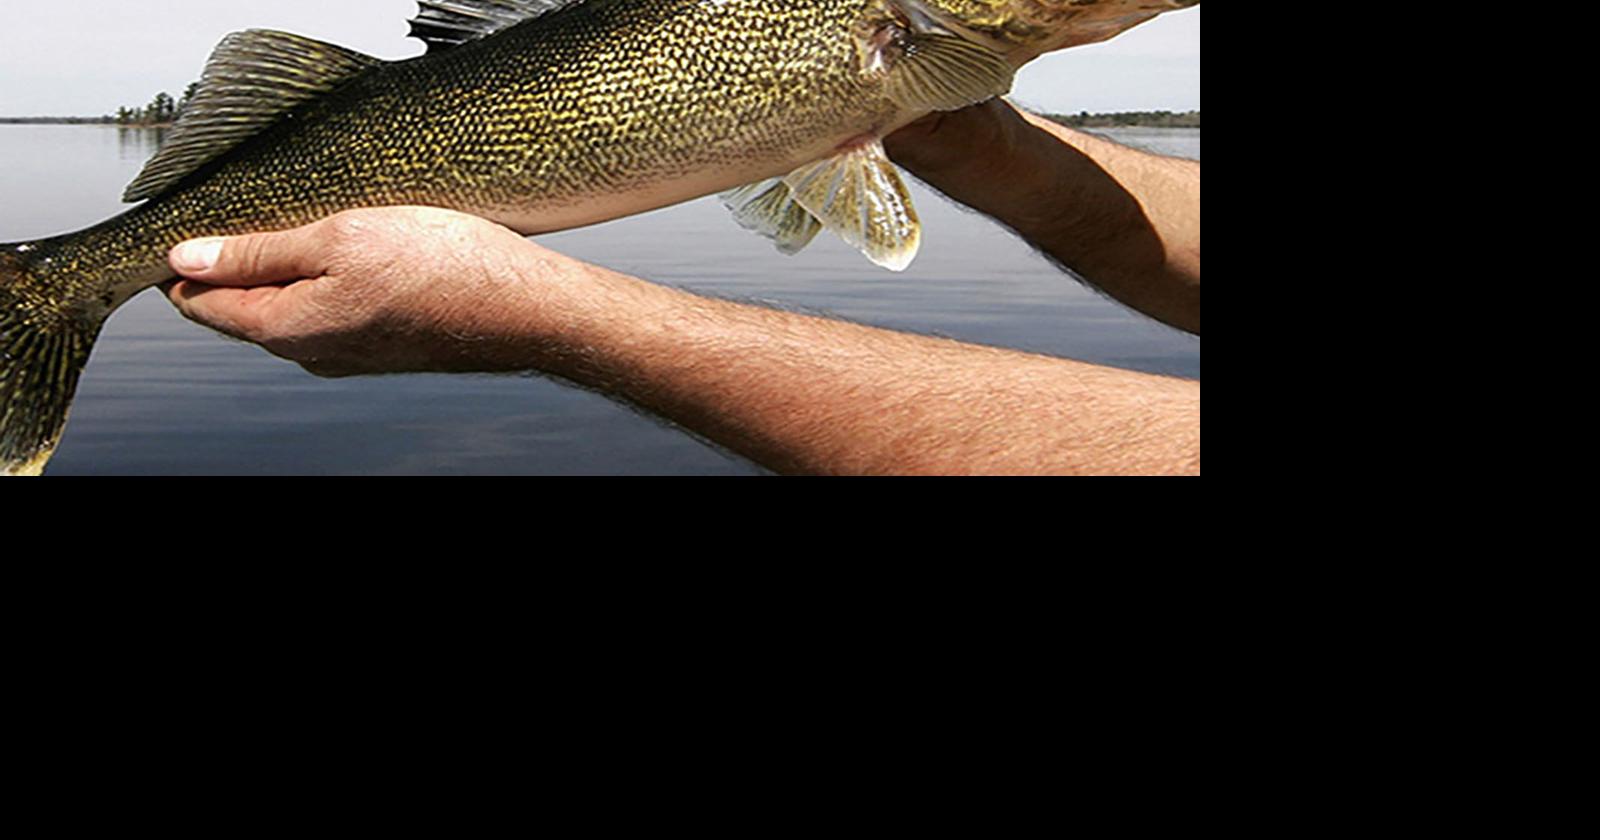 No longer a gray area: This study confirms walleye prefer certain colors, News